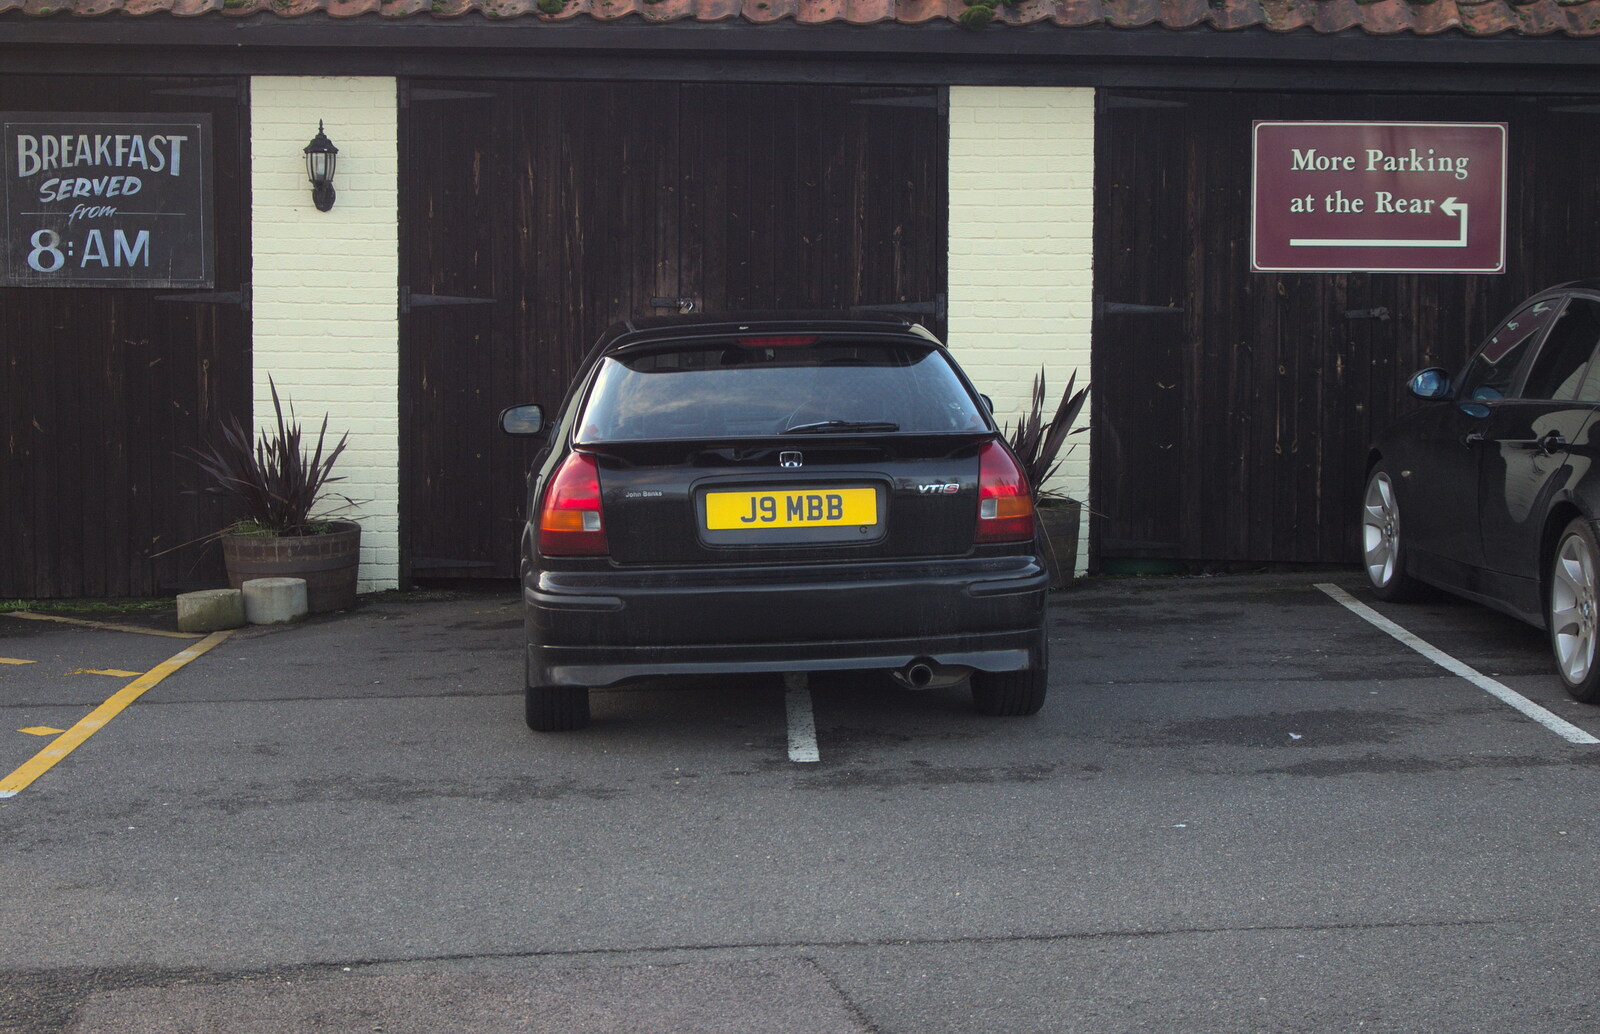 Quality fascist parking from New Year's Day and Lunch at the White Horse, Ipswich, Finningham and Brome - 1st January 2013